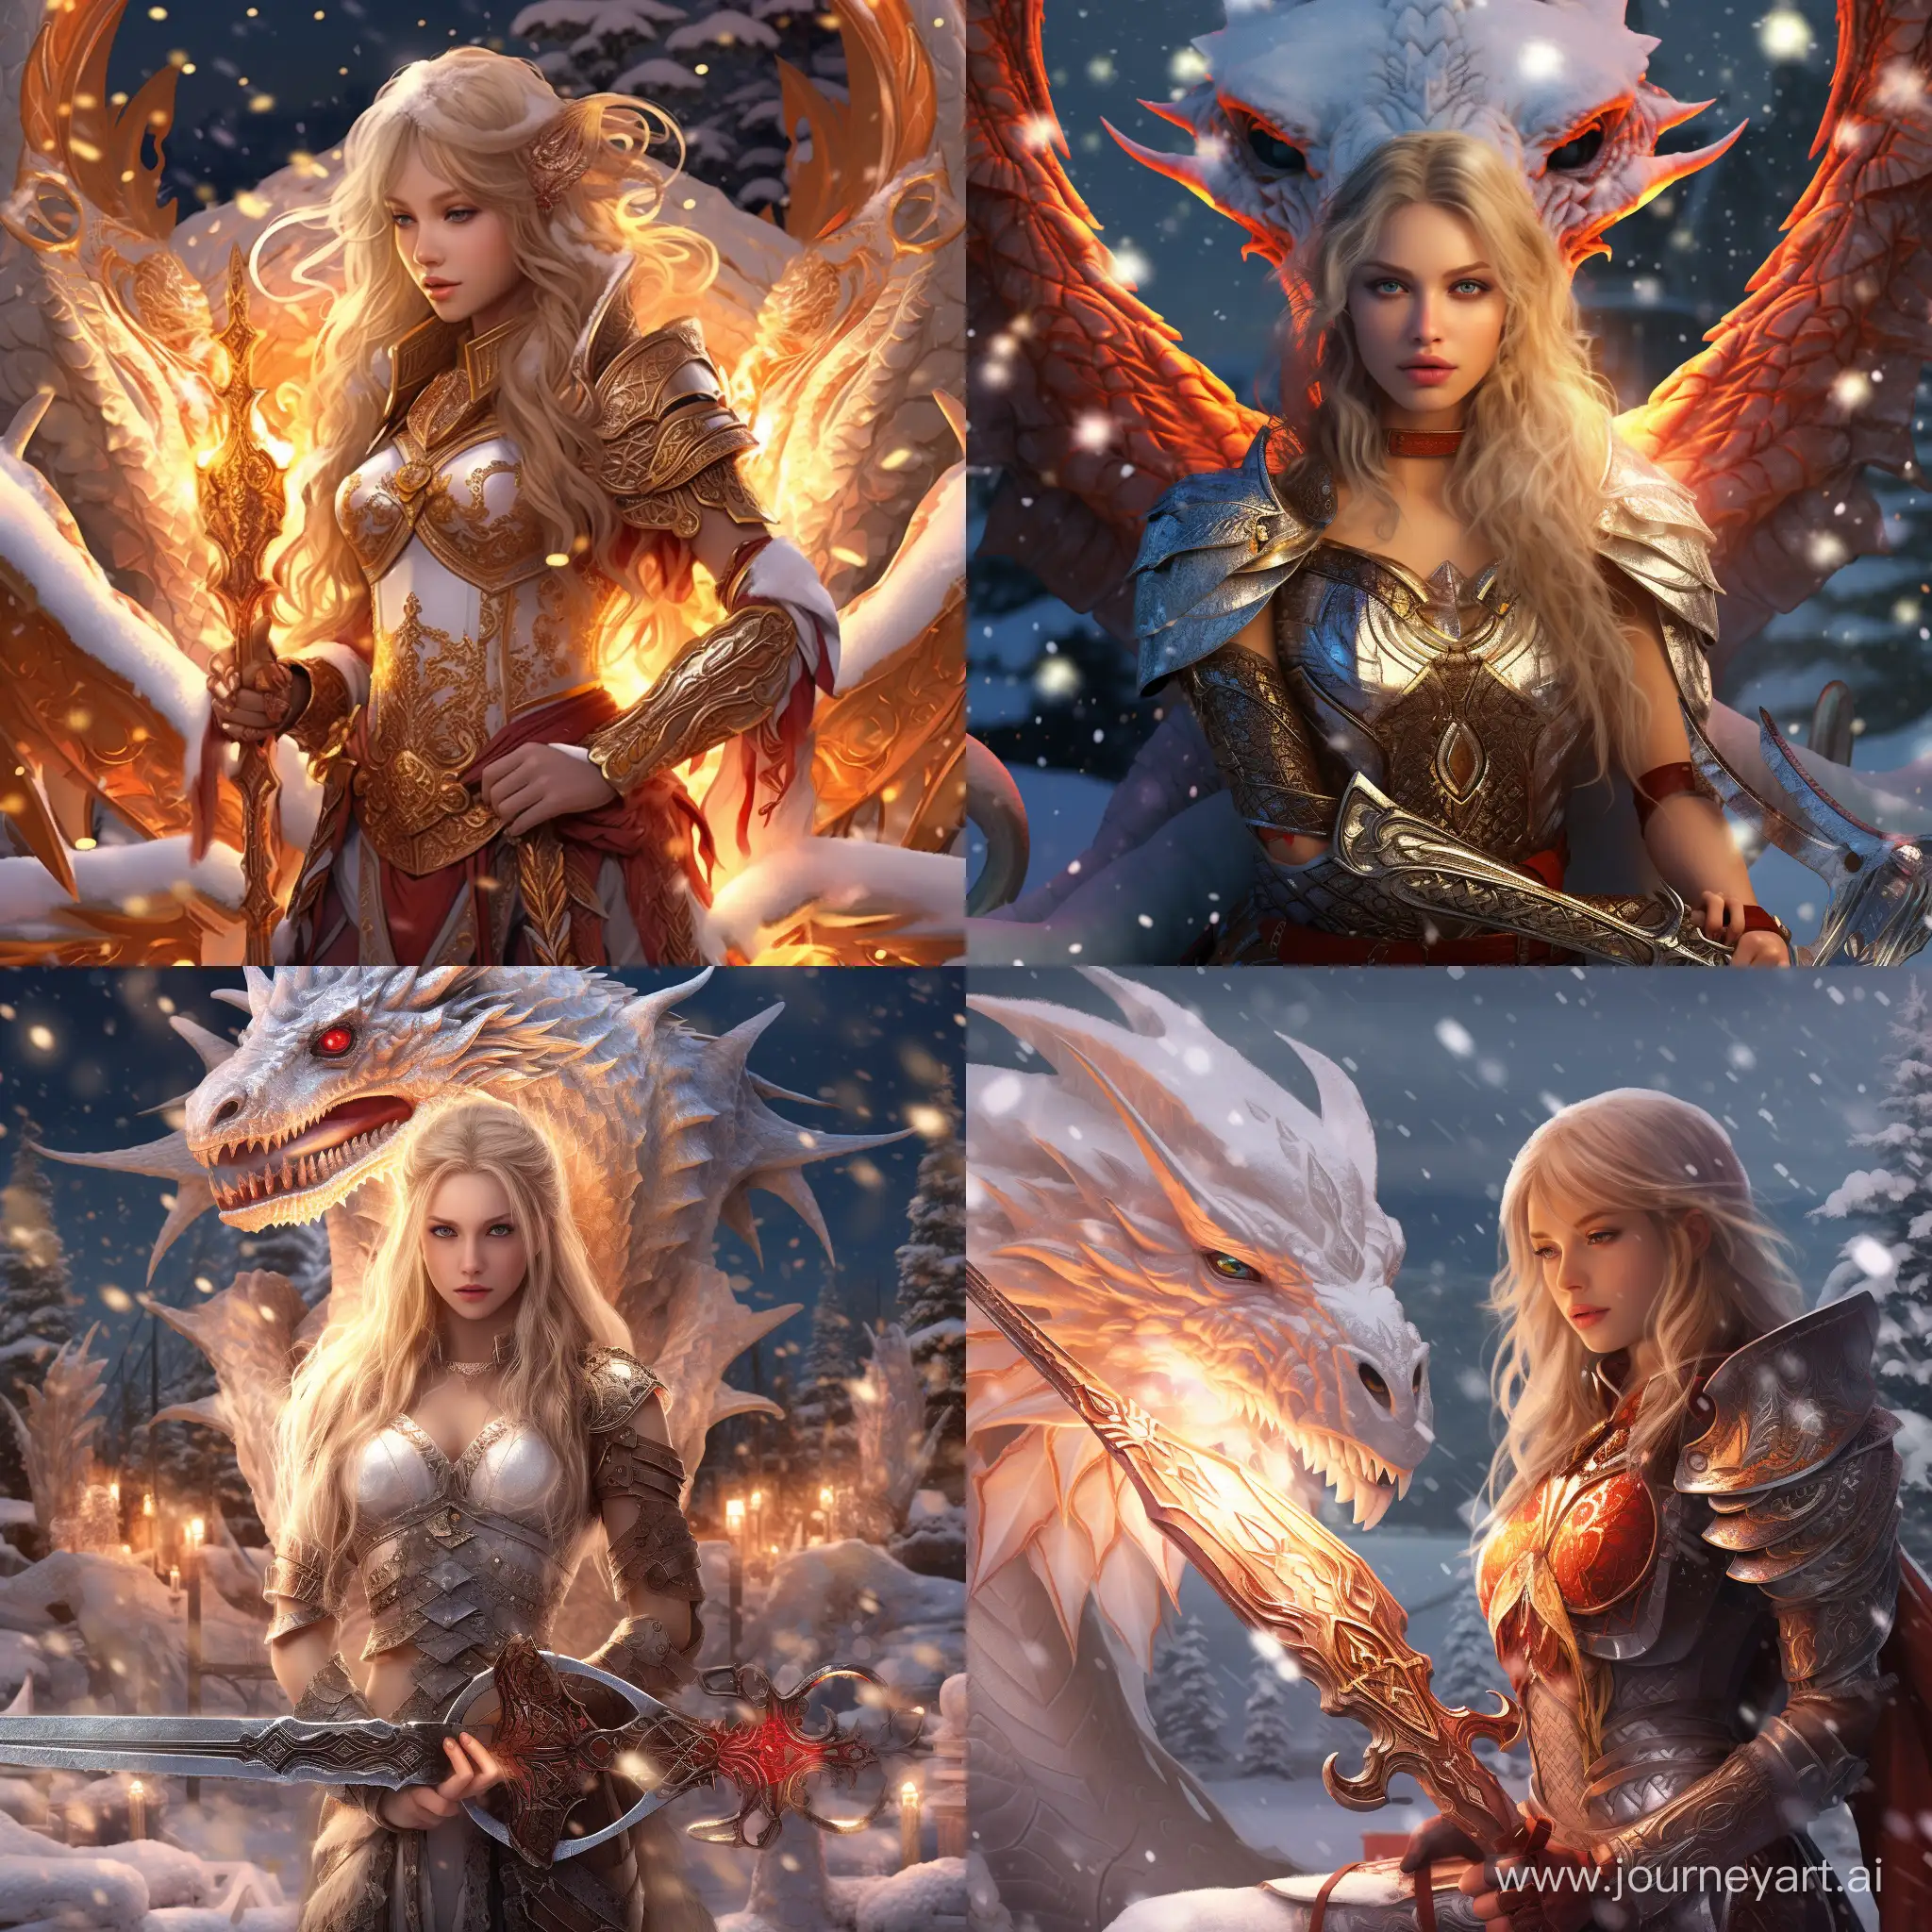 Winter-Dragon-Girl-with-Glowing-Scales-and-Sword-in-Snowy-Landscape